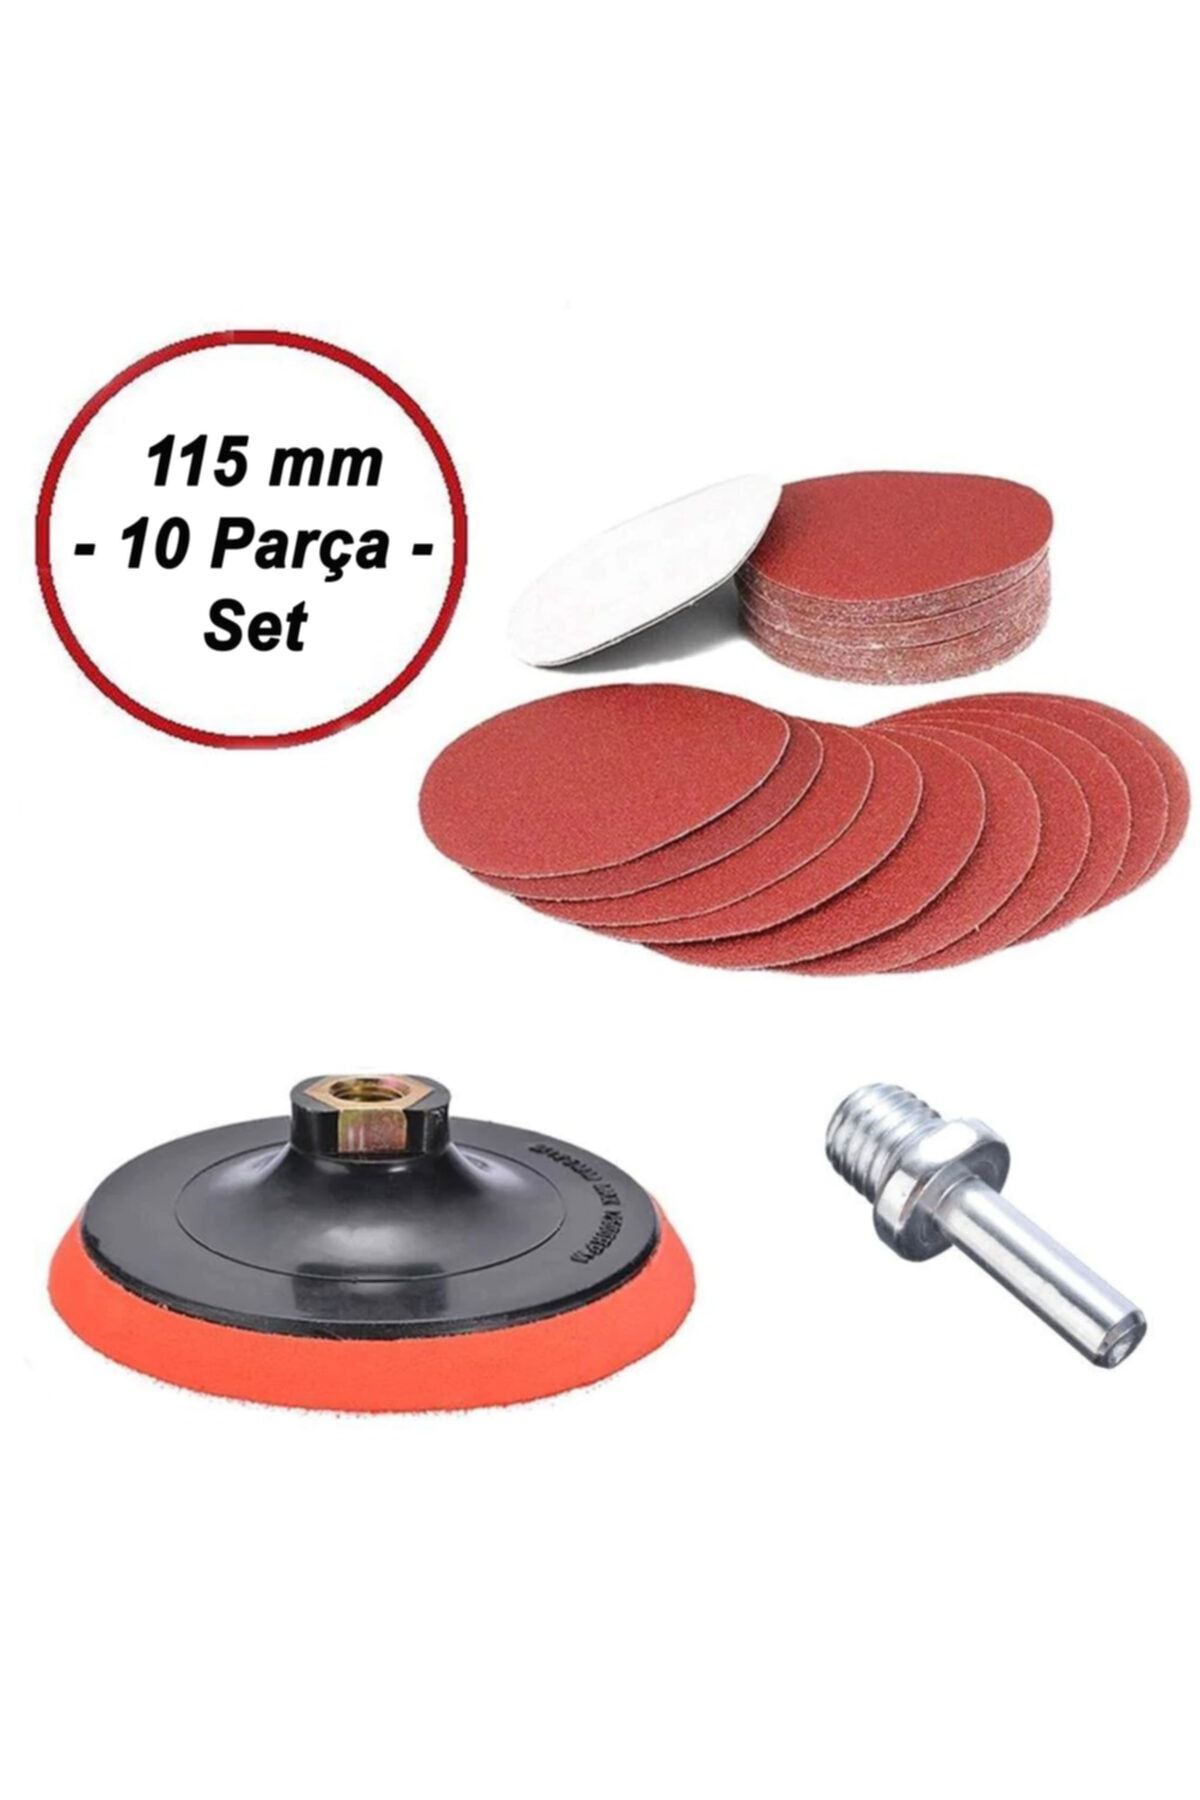 17 Pieces Velcro Abrasive Set + Drill Tool 115 mm Surface